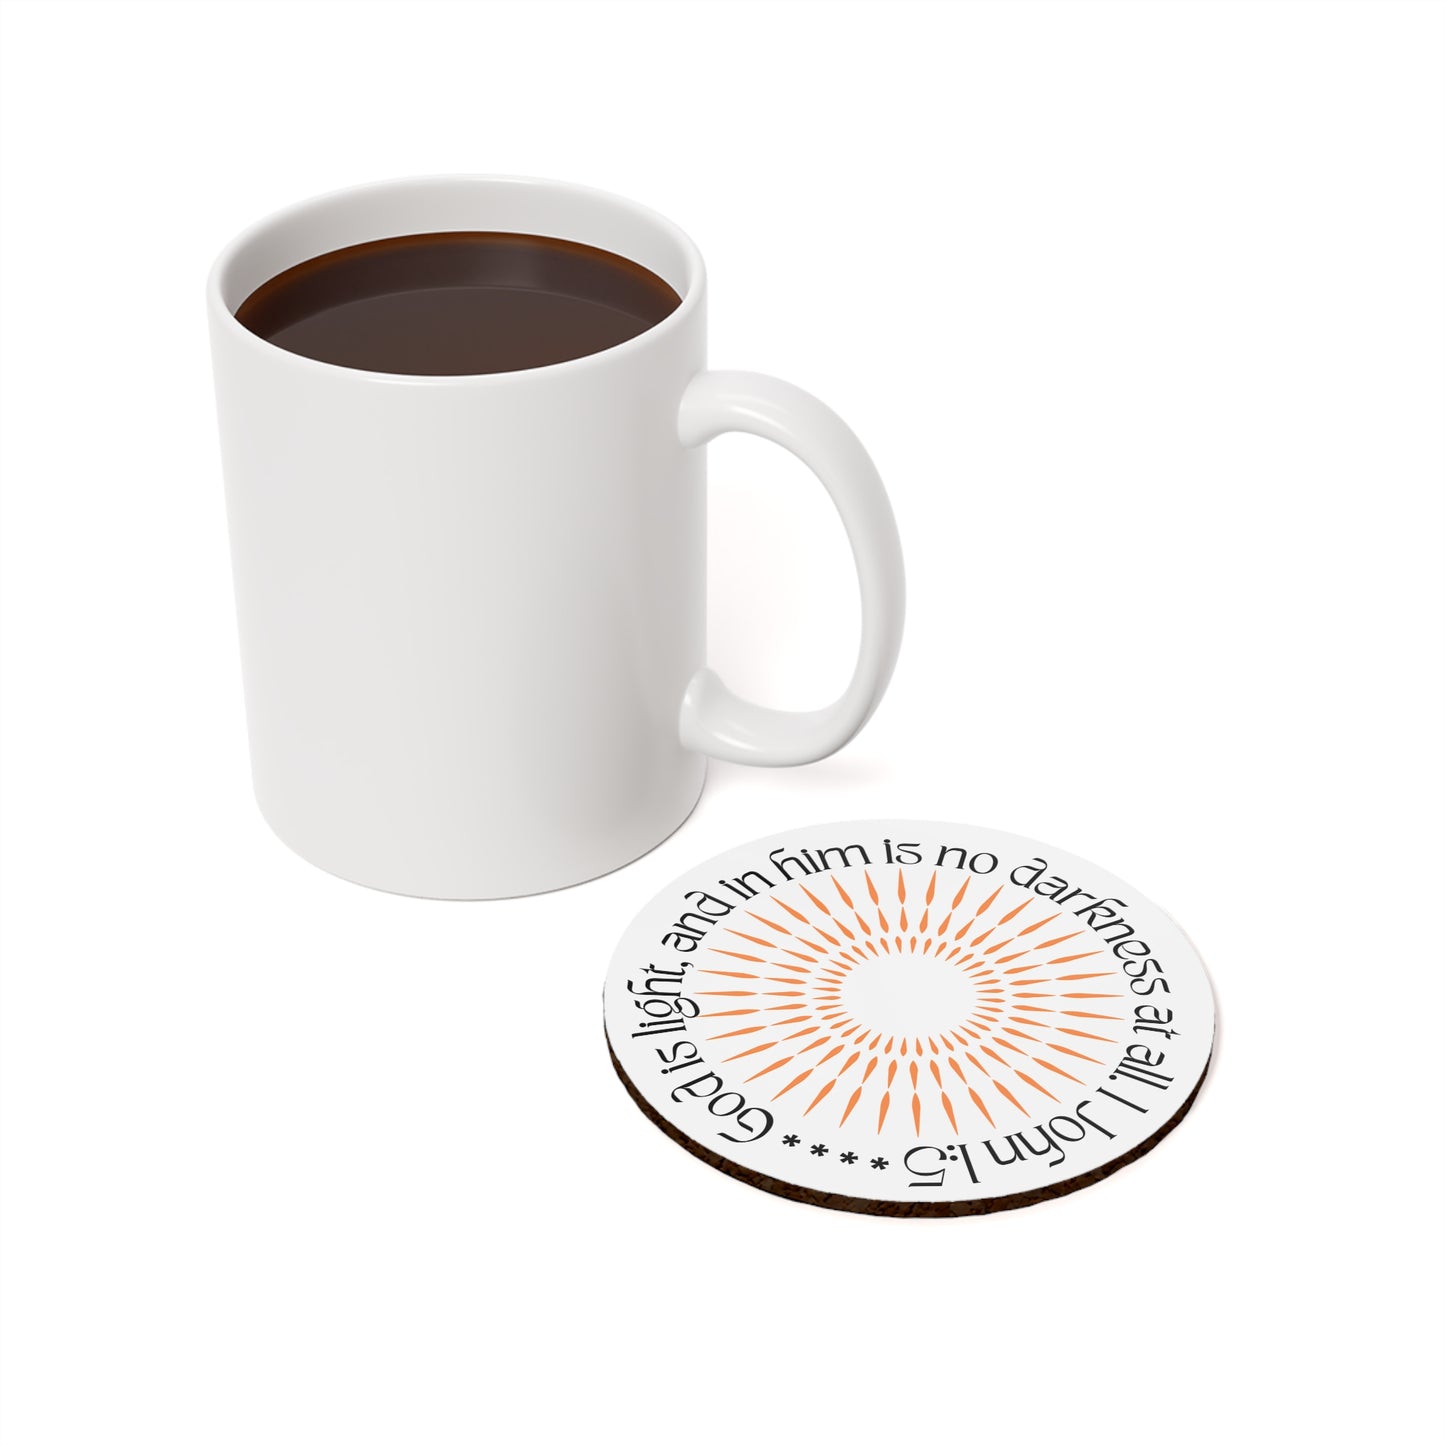 Coaster for Candles, Mugs, Glasses, God Is Light